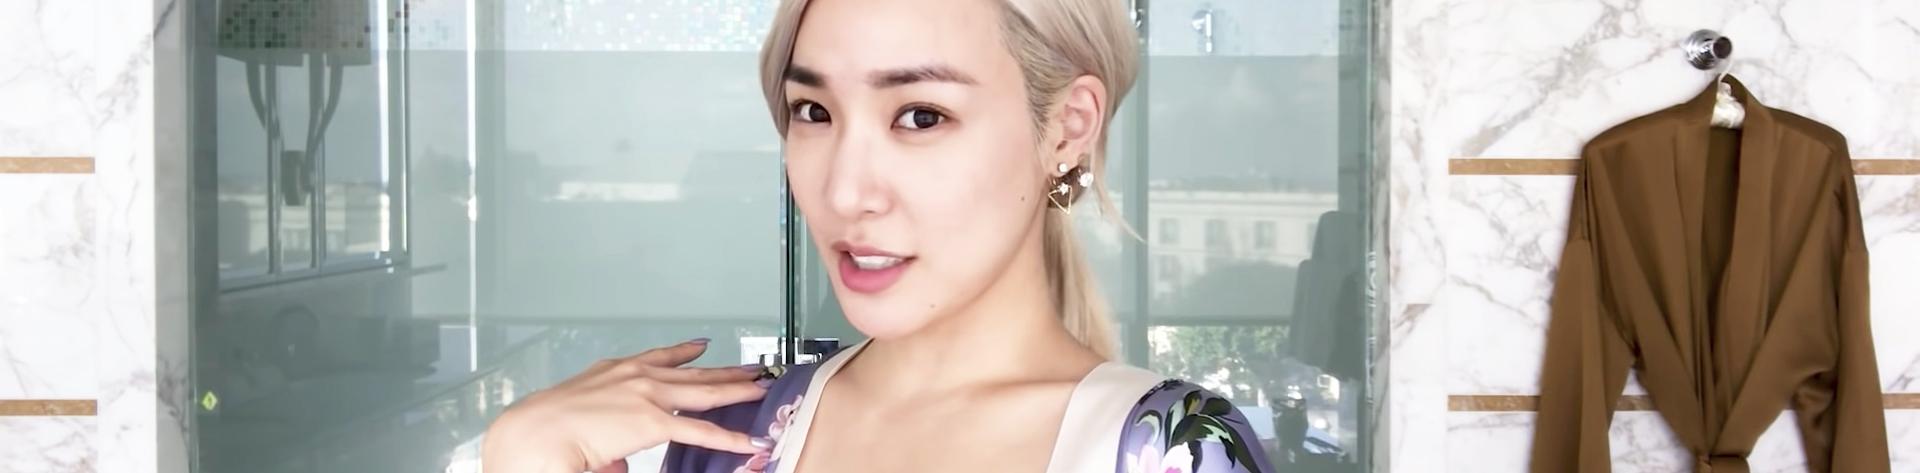 K-Beauty in the Limelight: More Celebs Who Love Asian Skincare & Beauty